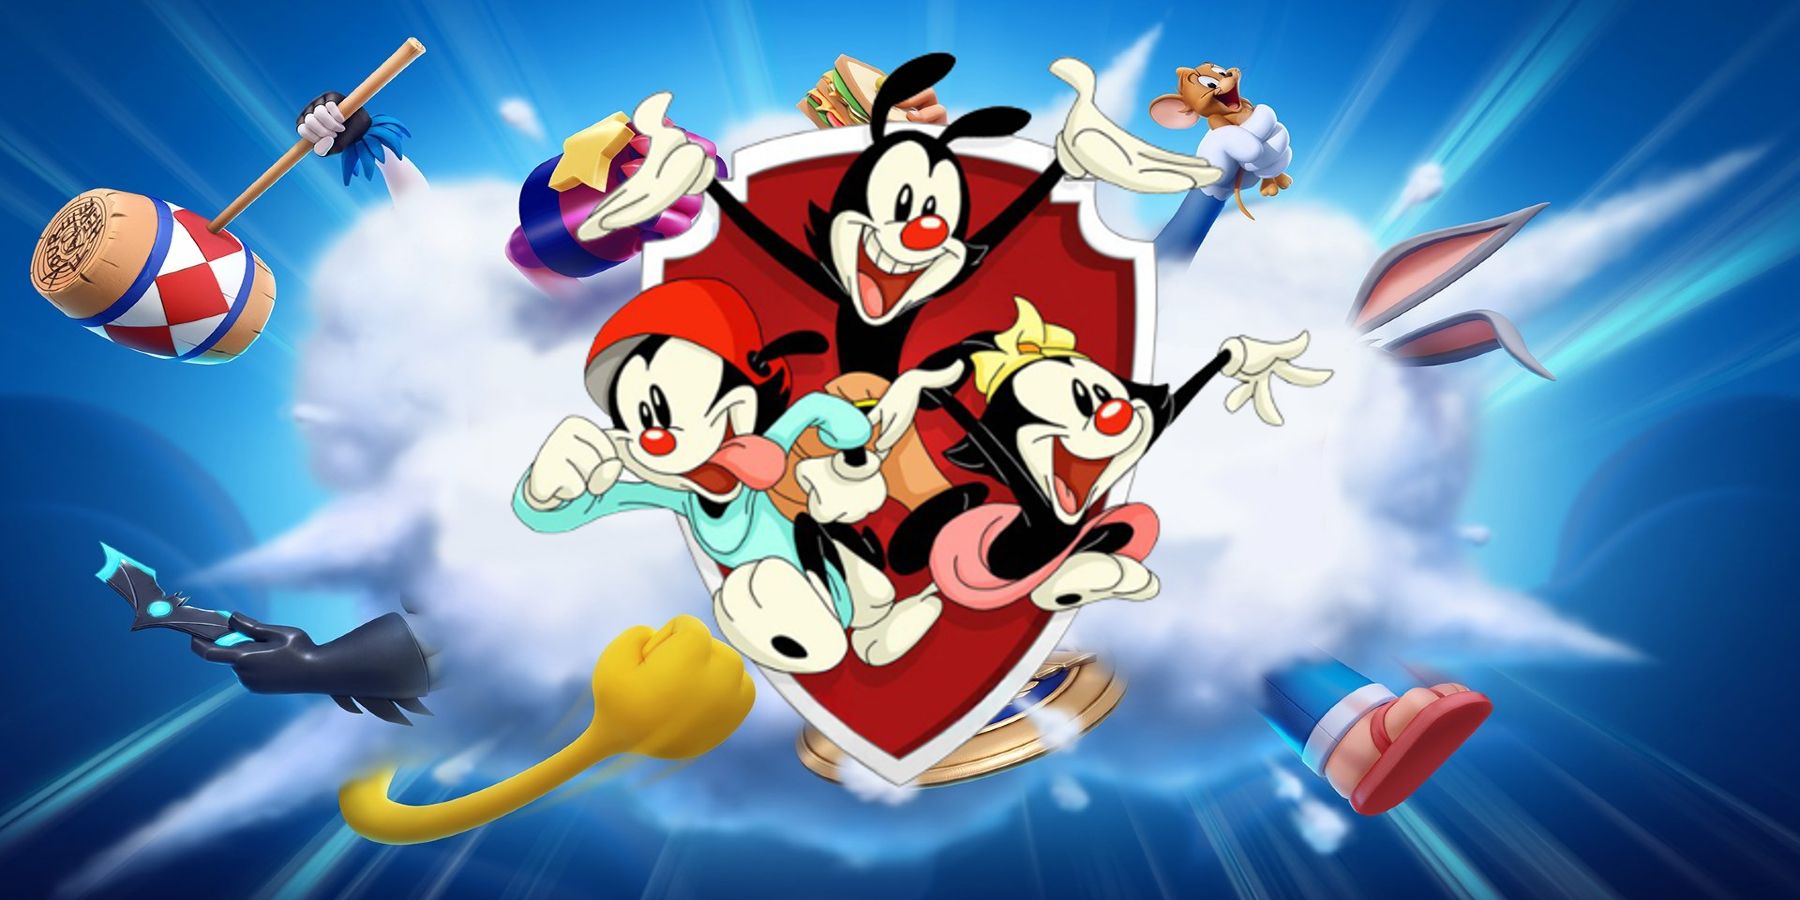 The Animaiacs, consisting of Yakko, Wakko, and Dot, over the MultiVersus background.